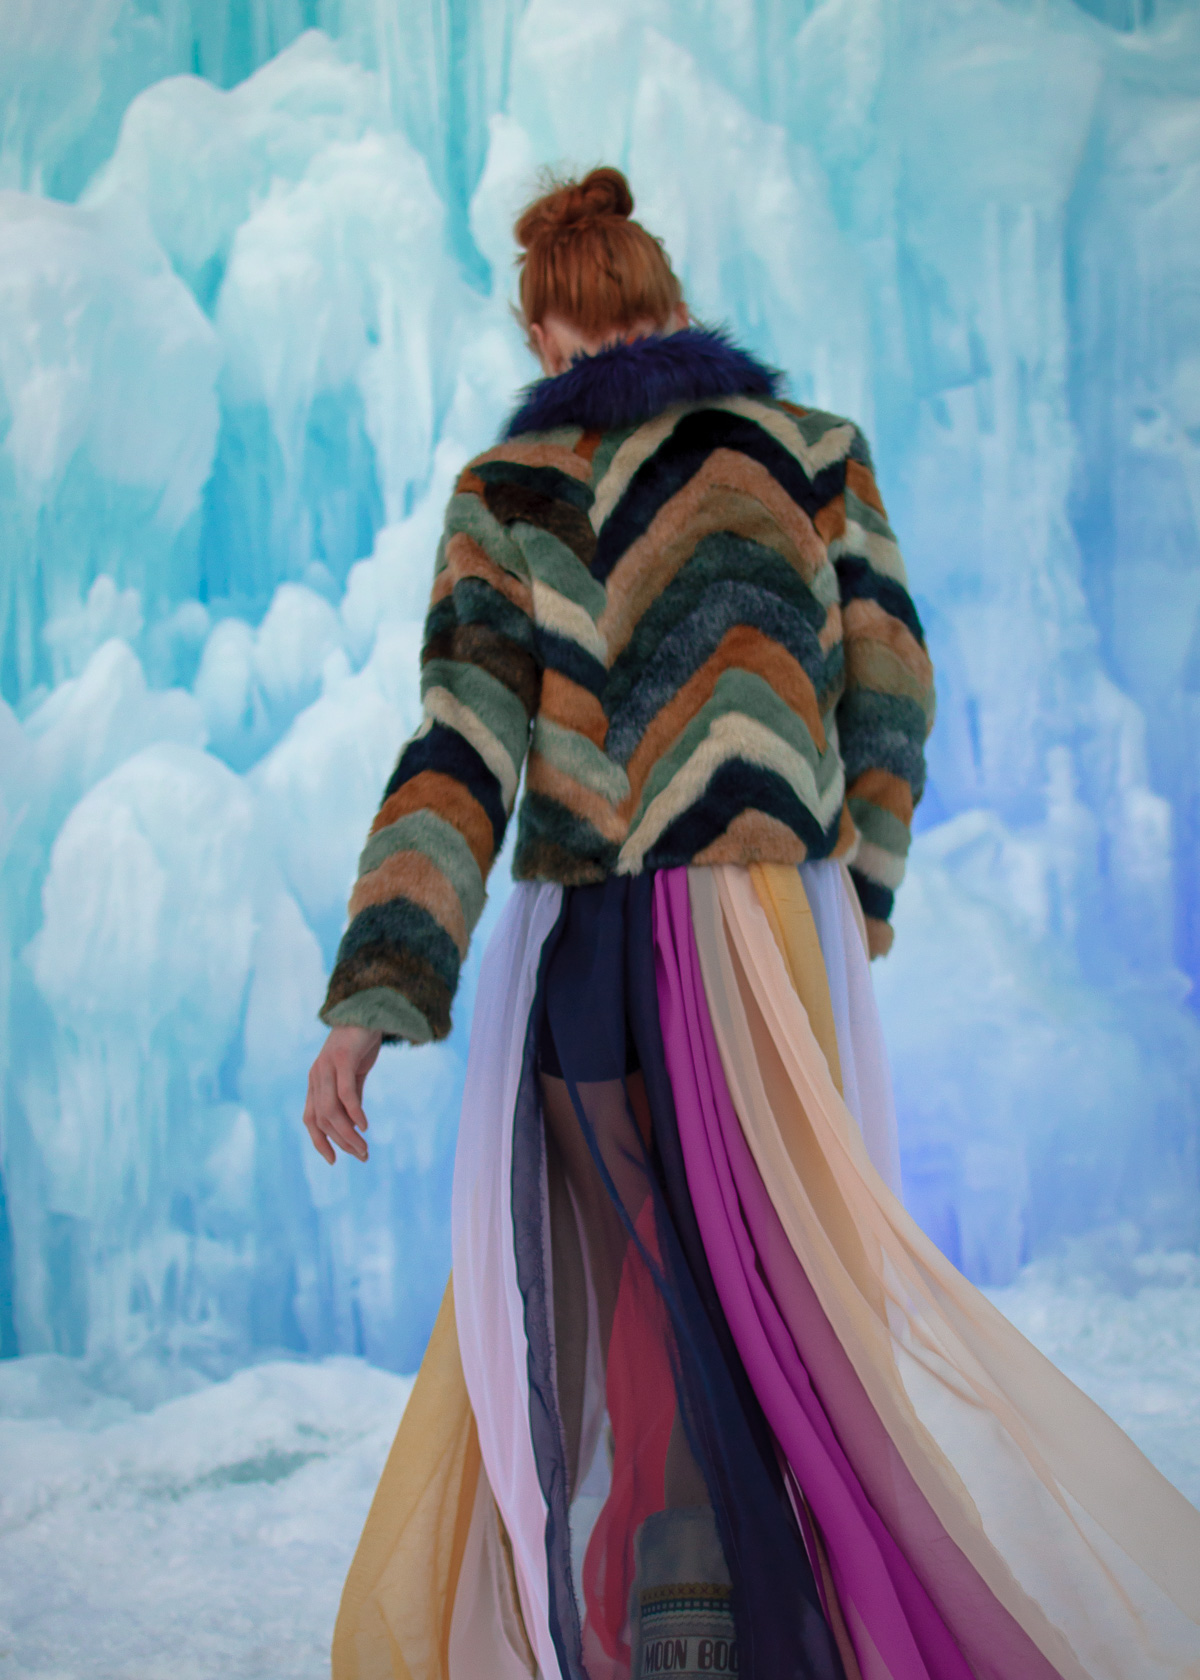 faux fur chevron coat at the ice castles in Lincoln New Hampshire